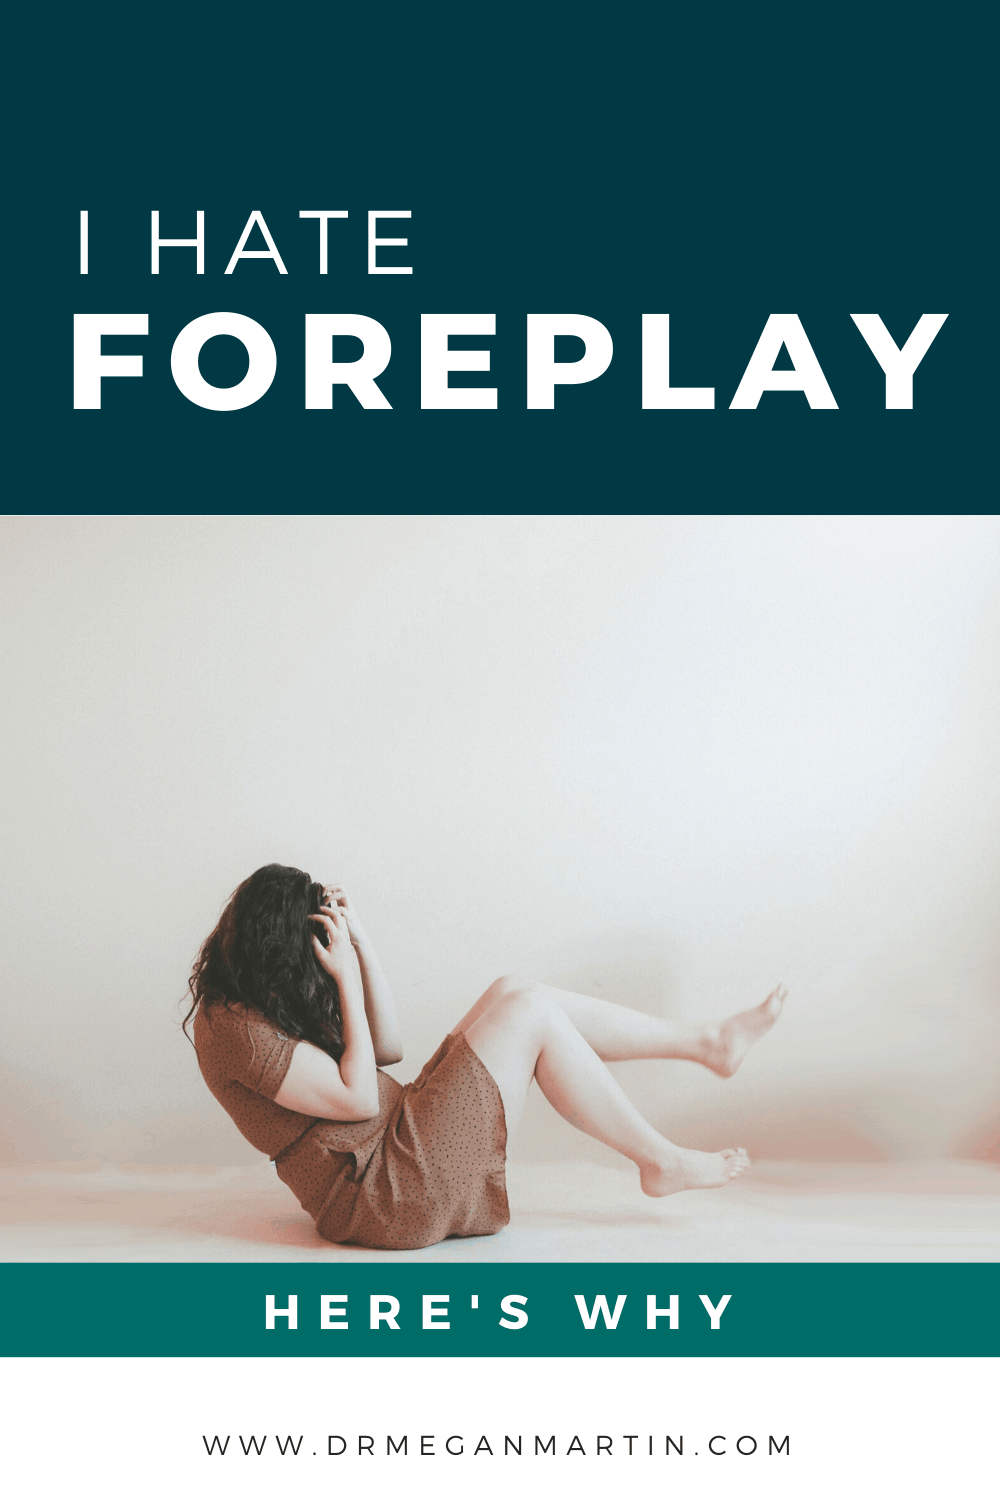 I hate foreplay, here's why